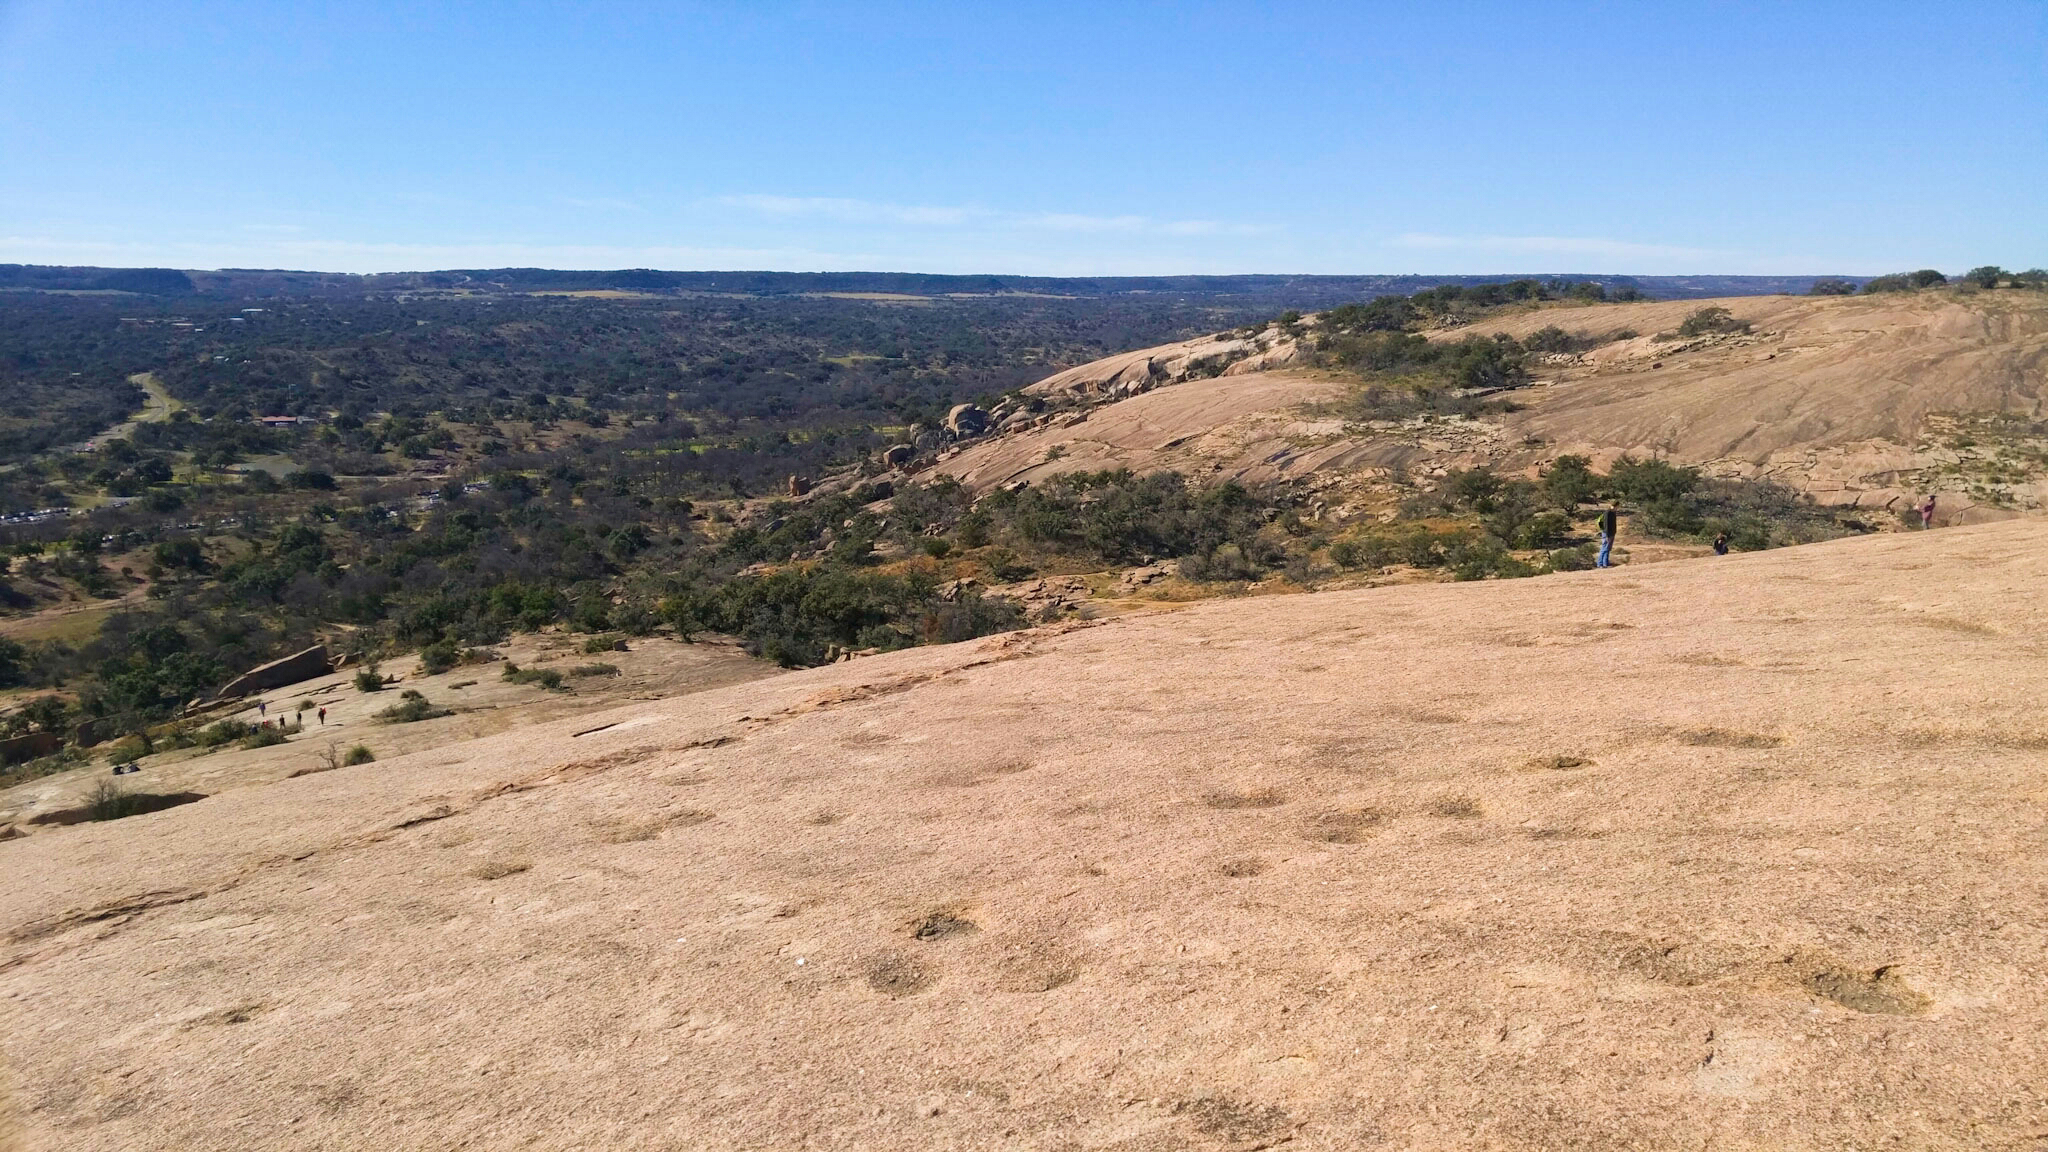 Enchanted Rock State Park, Texas